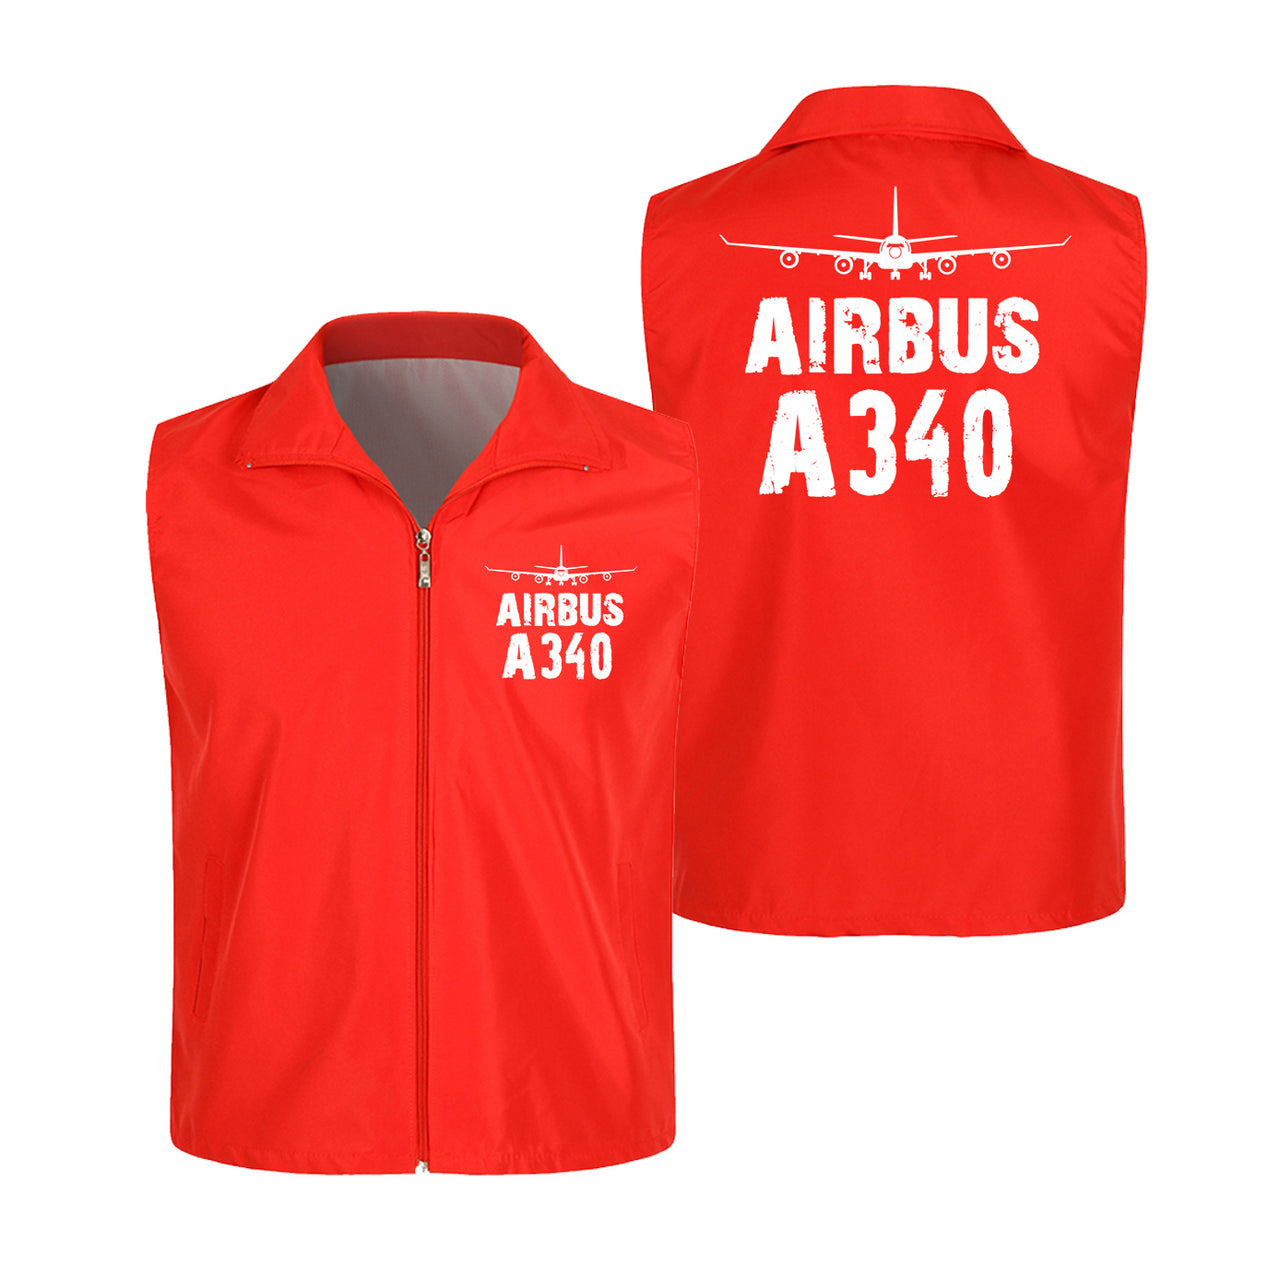 Airbus A340 & Plane Designed Thin Style Vests